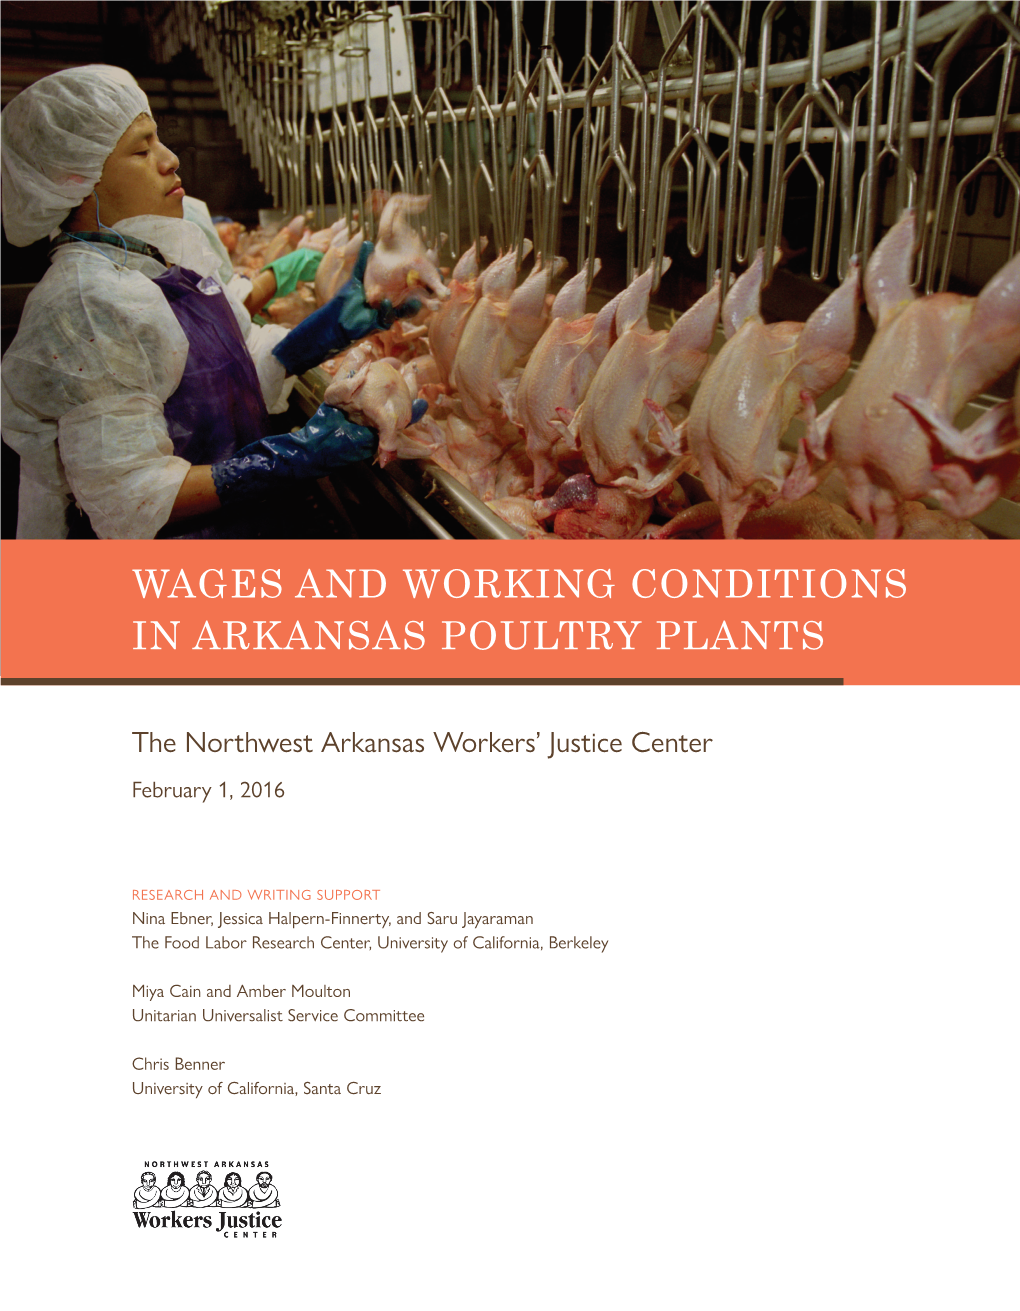 Wages and Working Conditions in Arkansas Poultry Plants